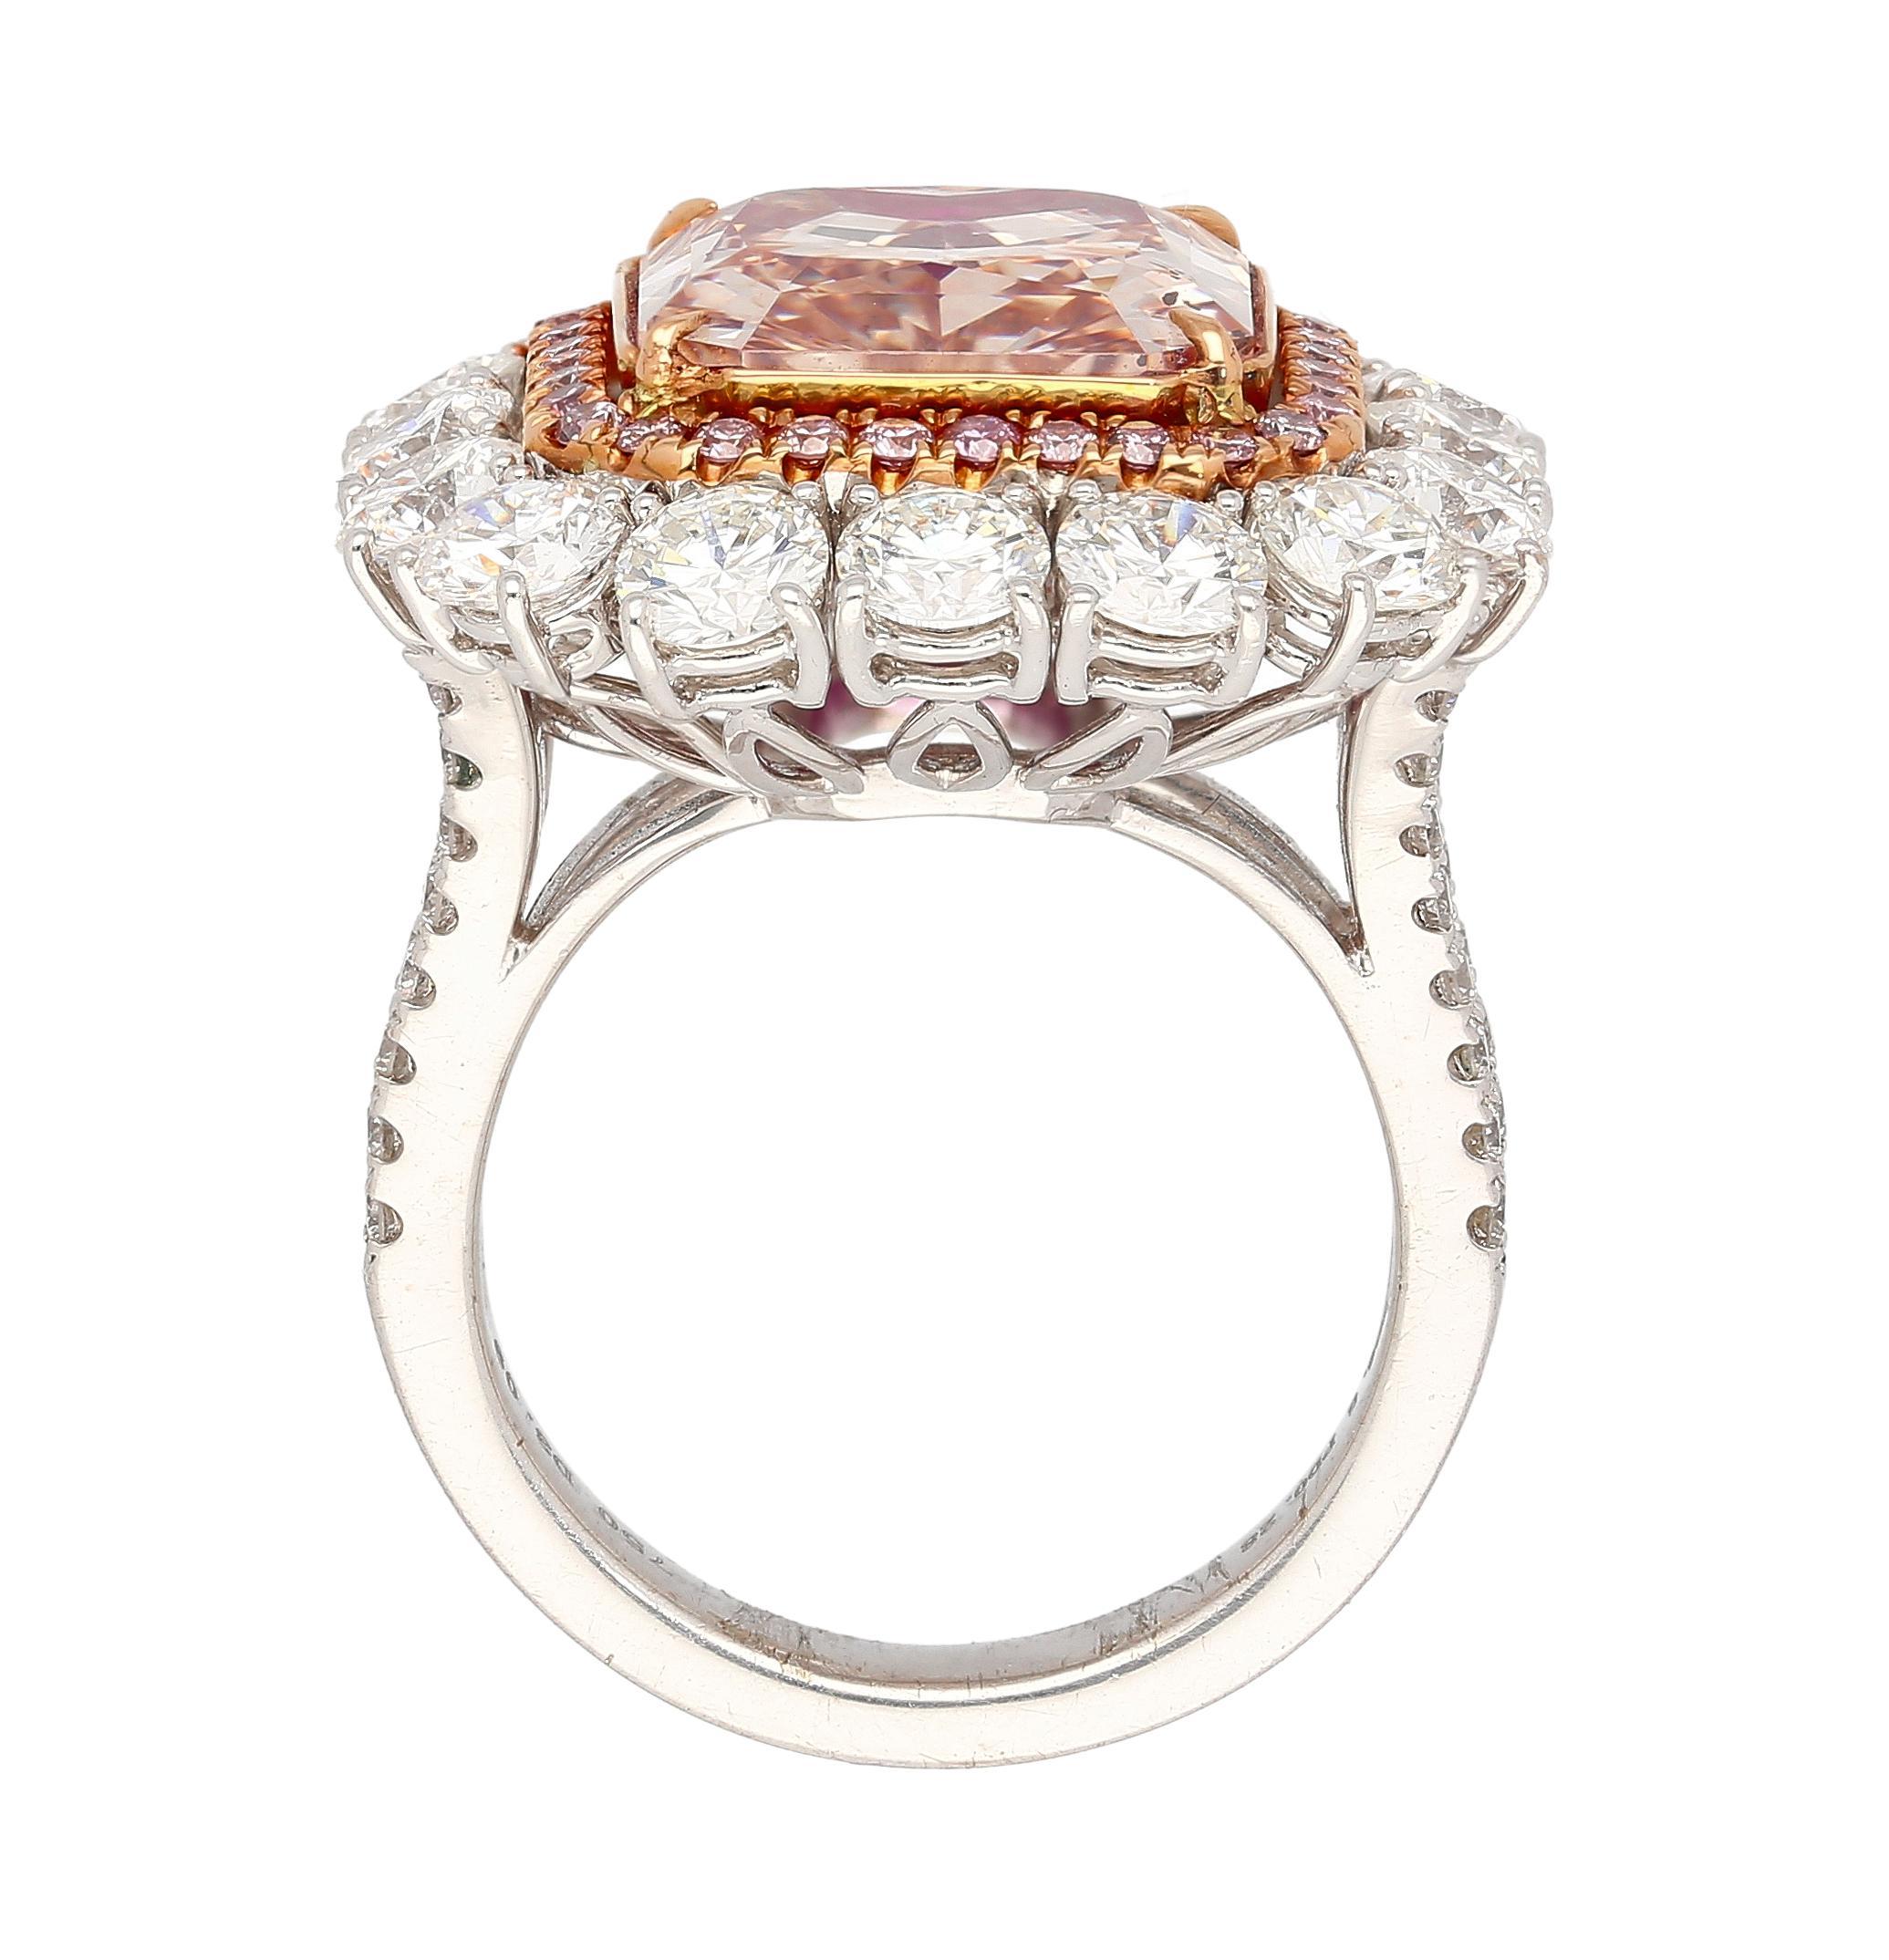 GIA Certified 6.53 Carat Fancy Pink-Brown & White Diamond Ring in 18K Rose Gold For Sale 1